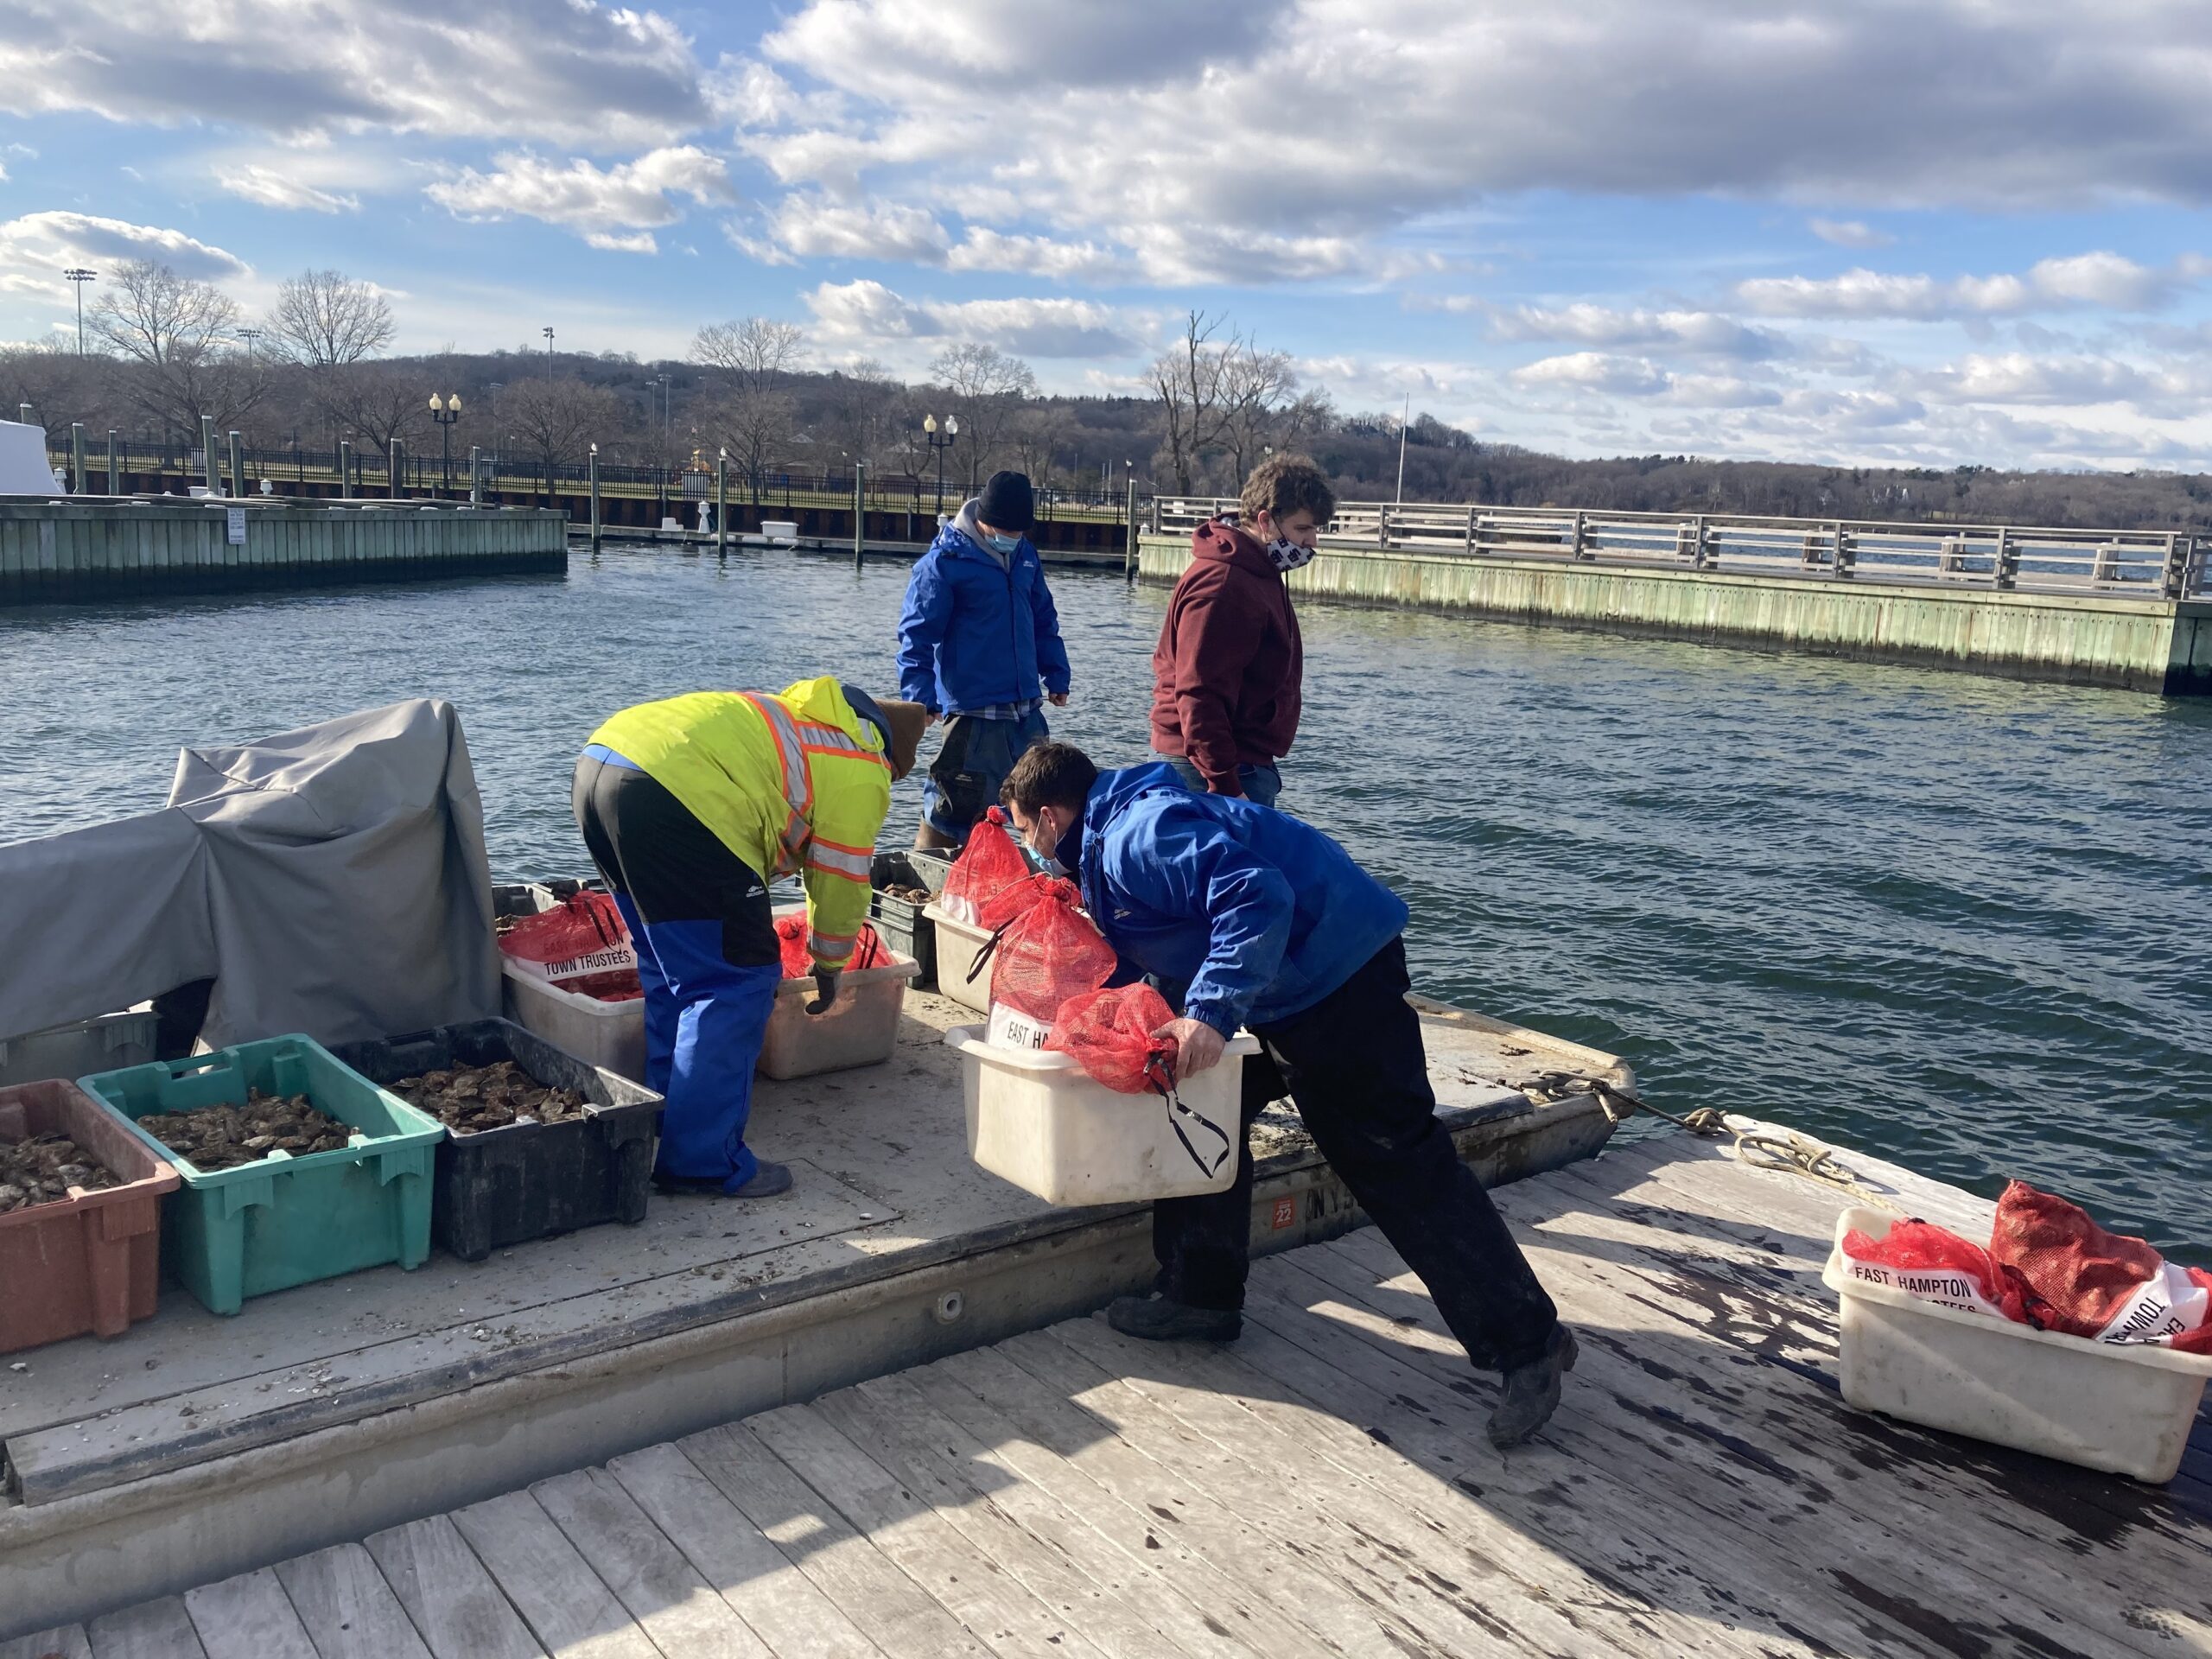 Workers move crates of oysters in Oyster Bay. © CARL LOBUE/THE NATURE CONSERVANCY